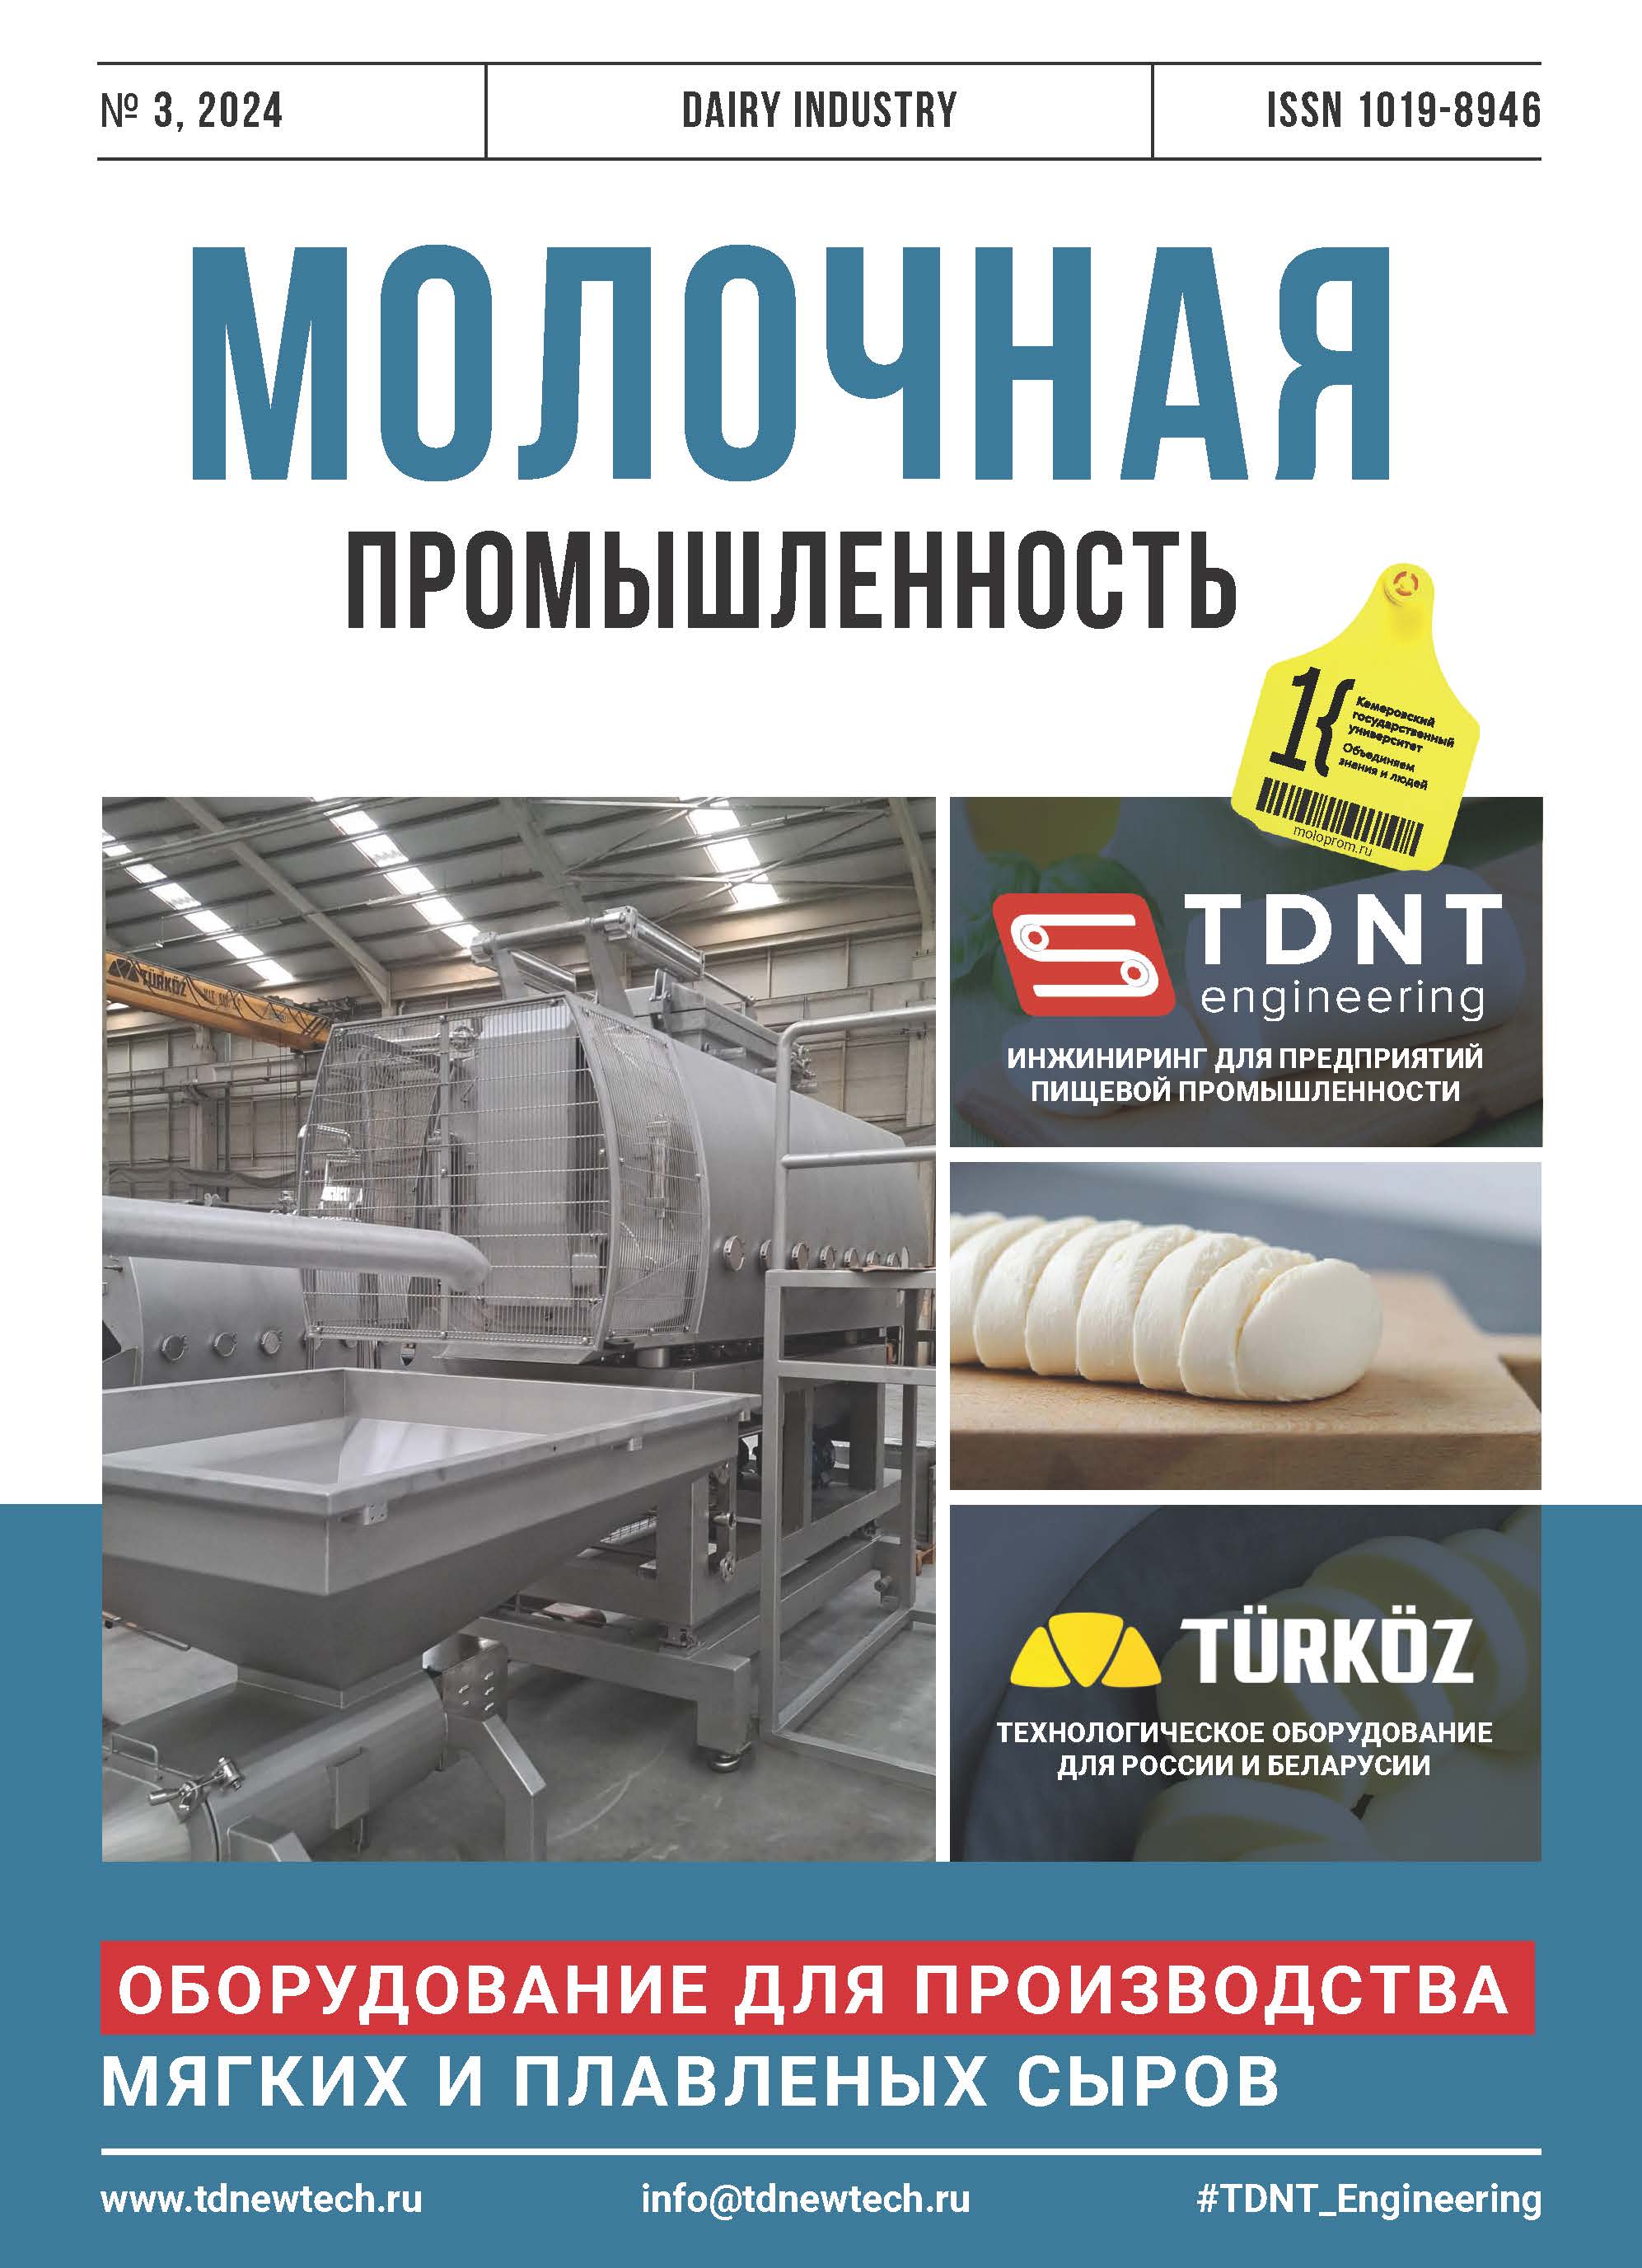                         Russian New Generation Automated Process Control Aystem for Dairy Industry is a Solution to the Problem of Import Substitution
            